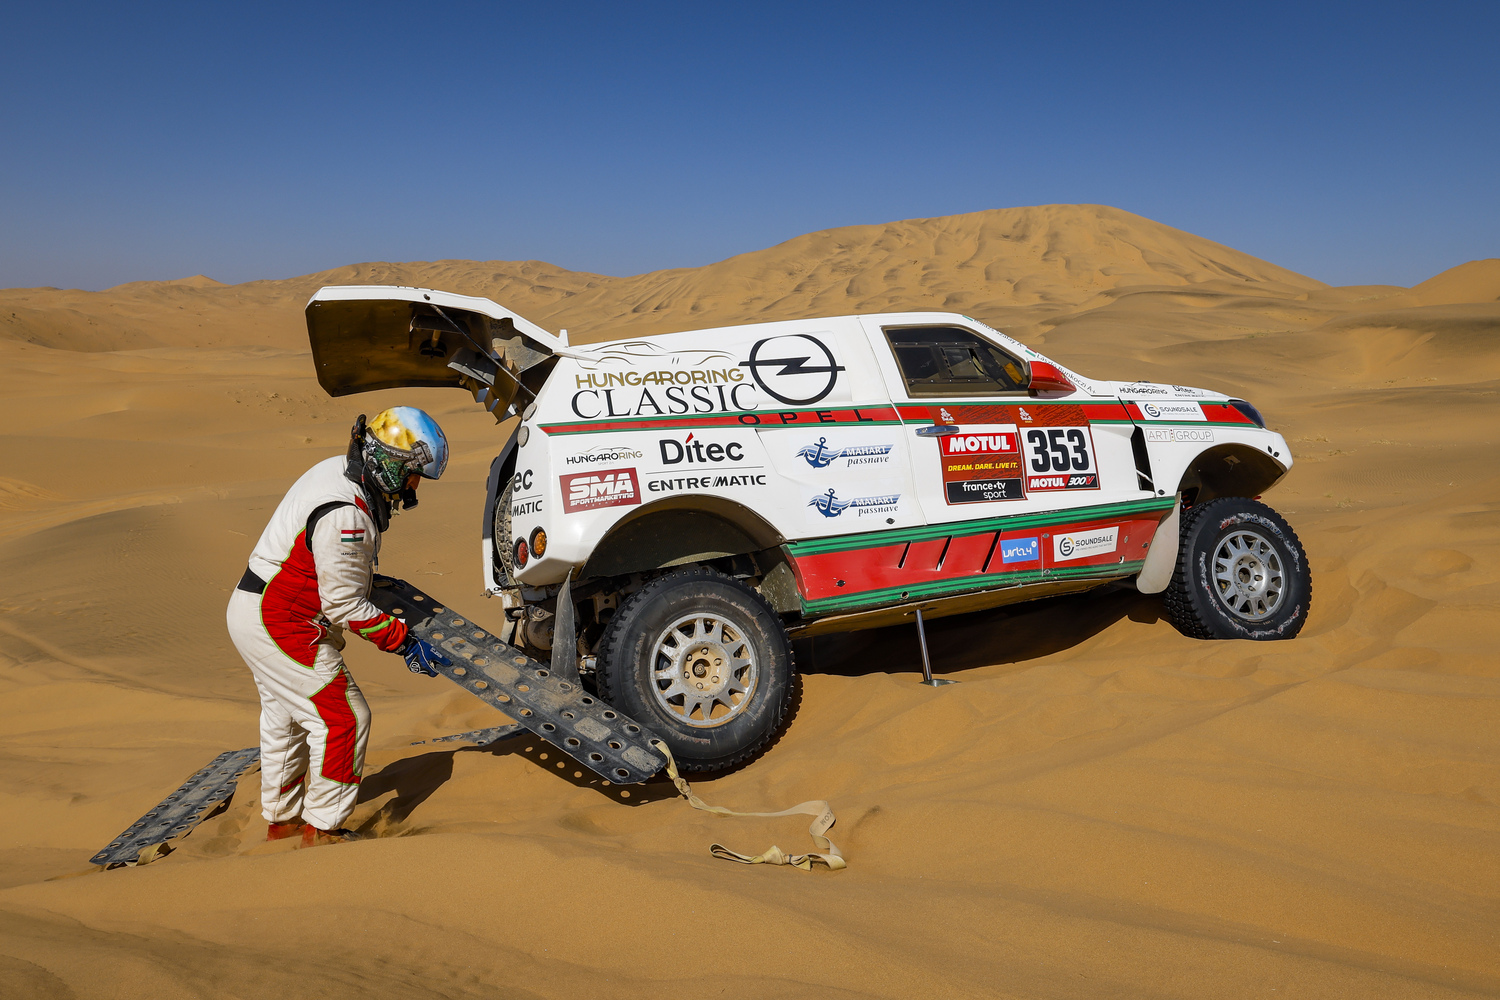 2021 dakar rally: stage 2 in high resolution images.